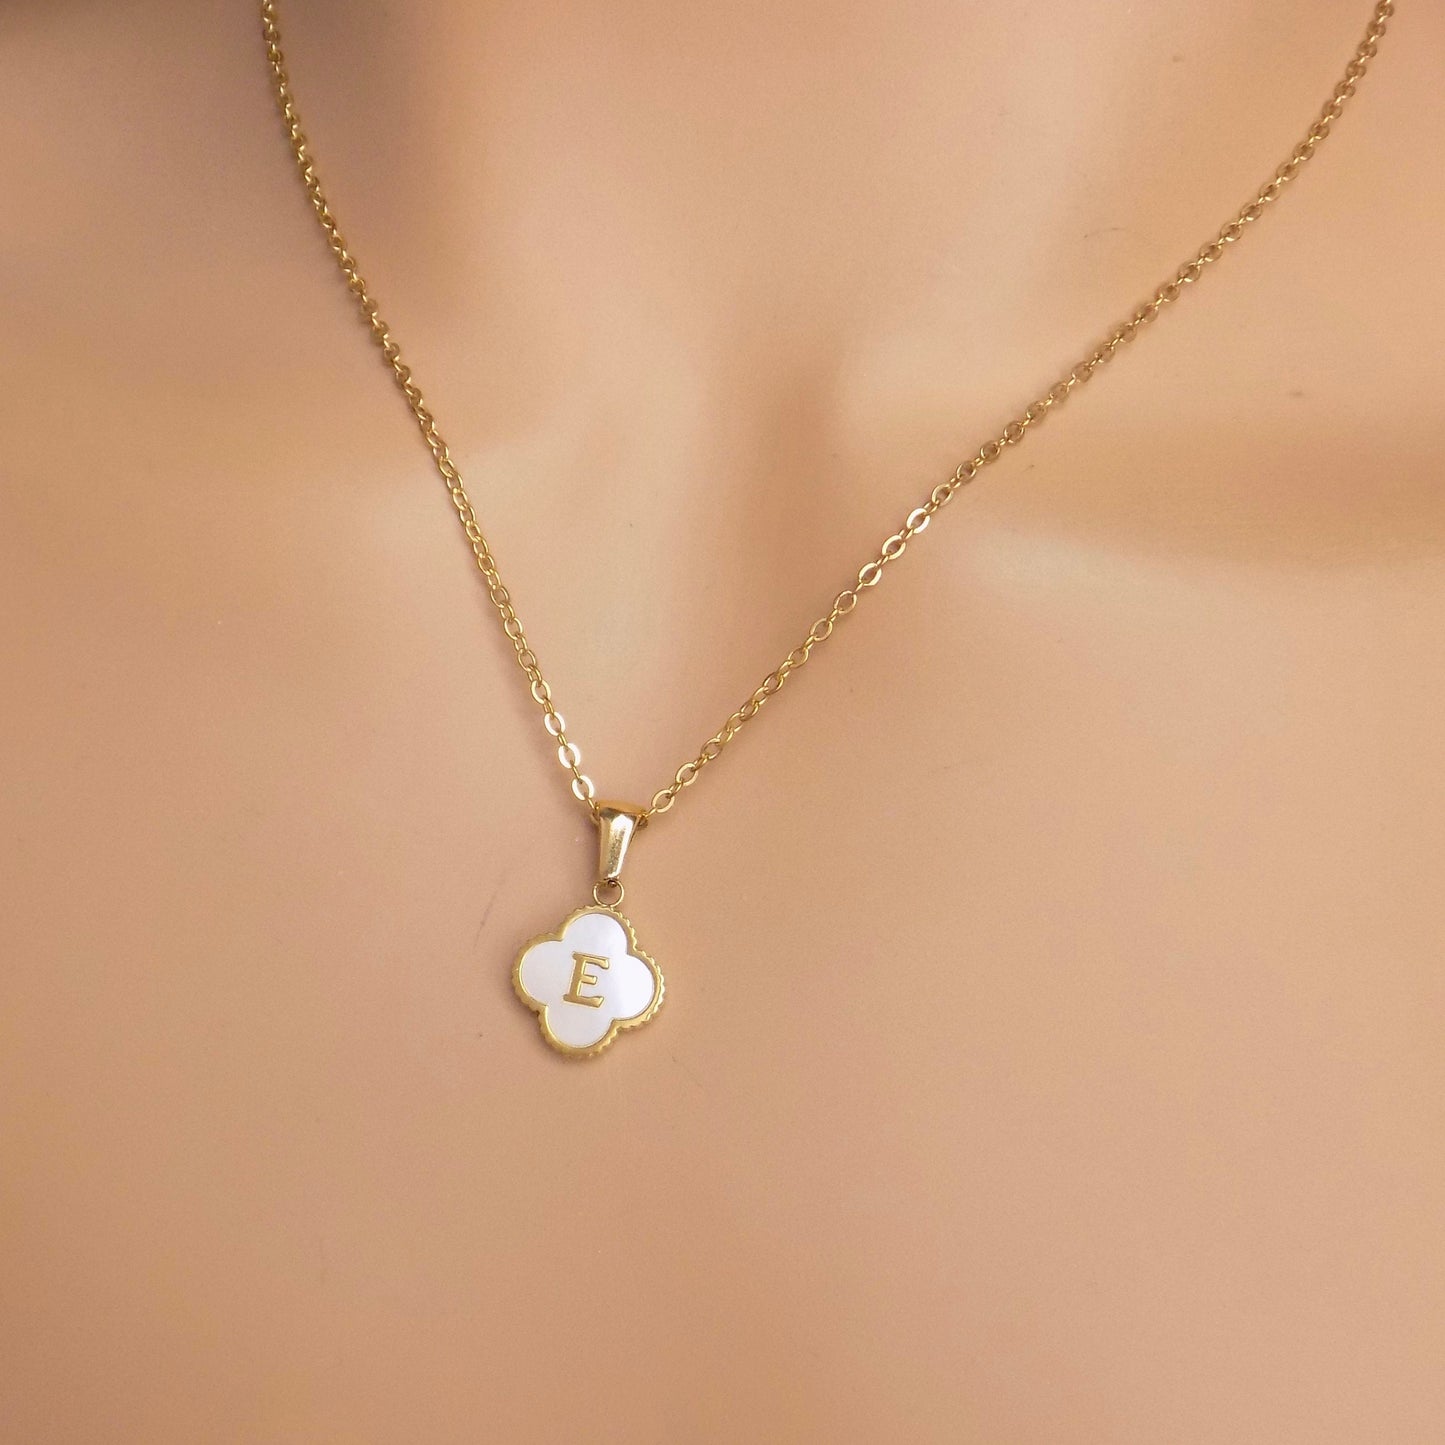 Gold Initial Flower Charm Necklace Mother of Pearl Stone - Personalized Christmas Gifts For Women - M7-150